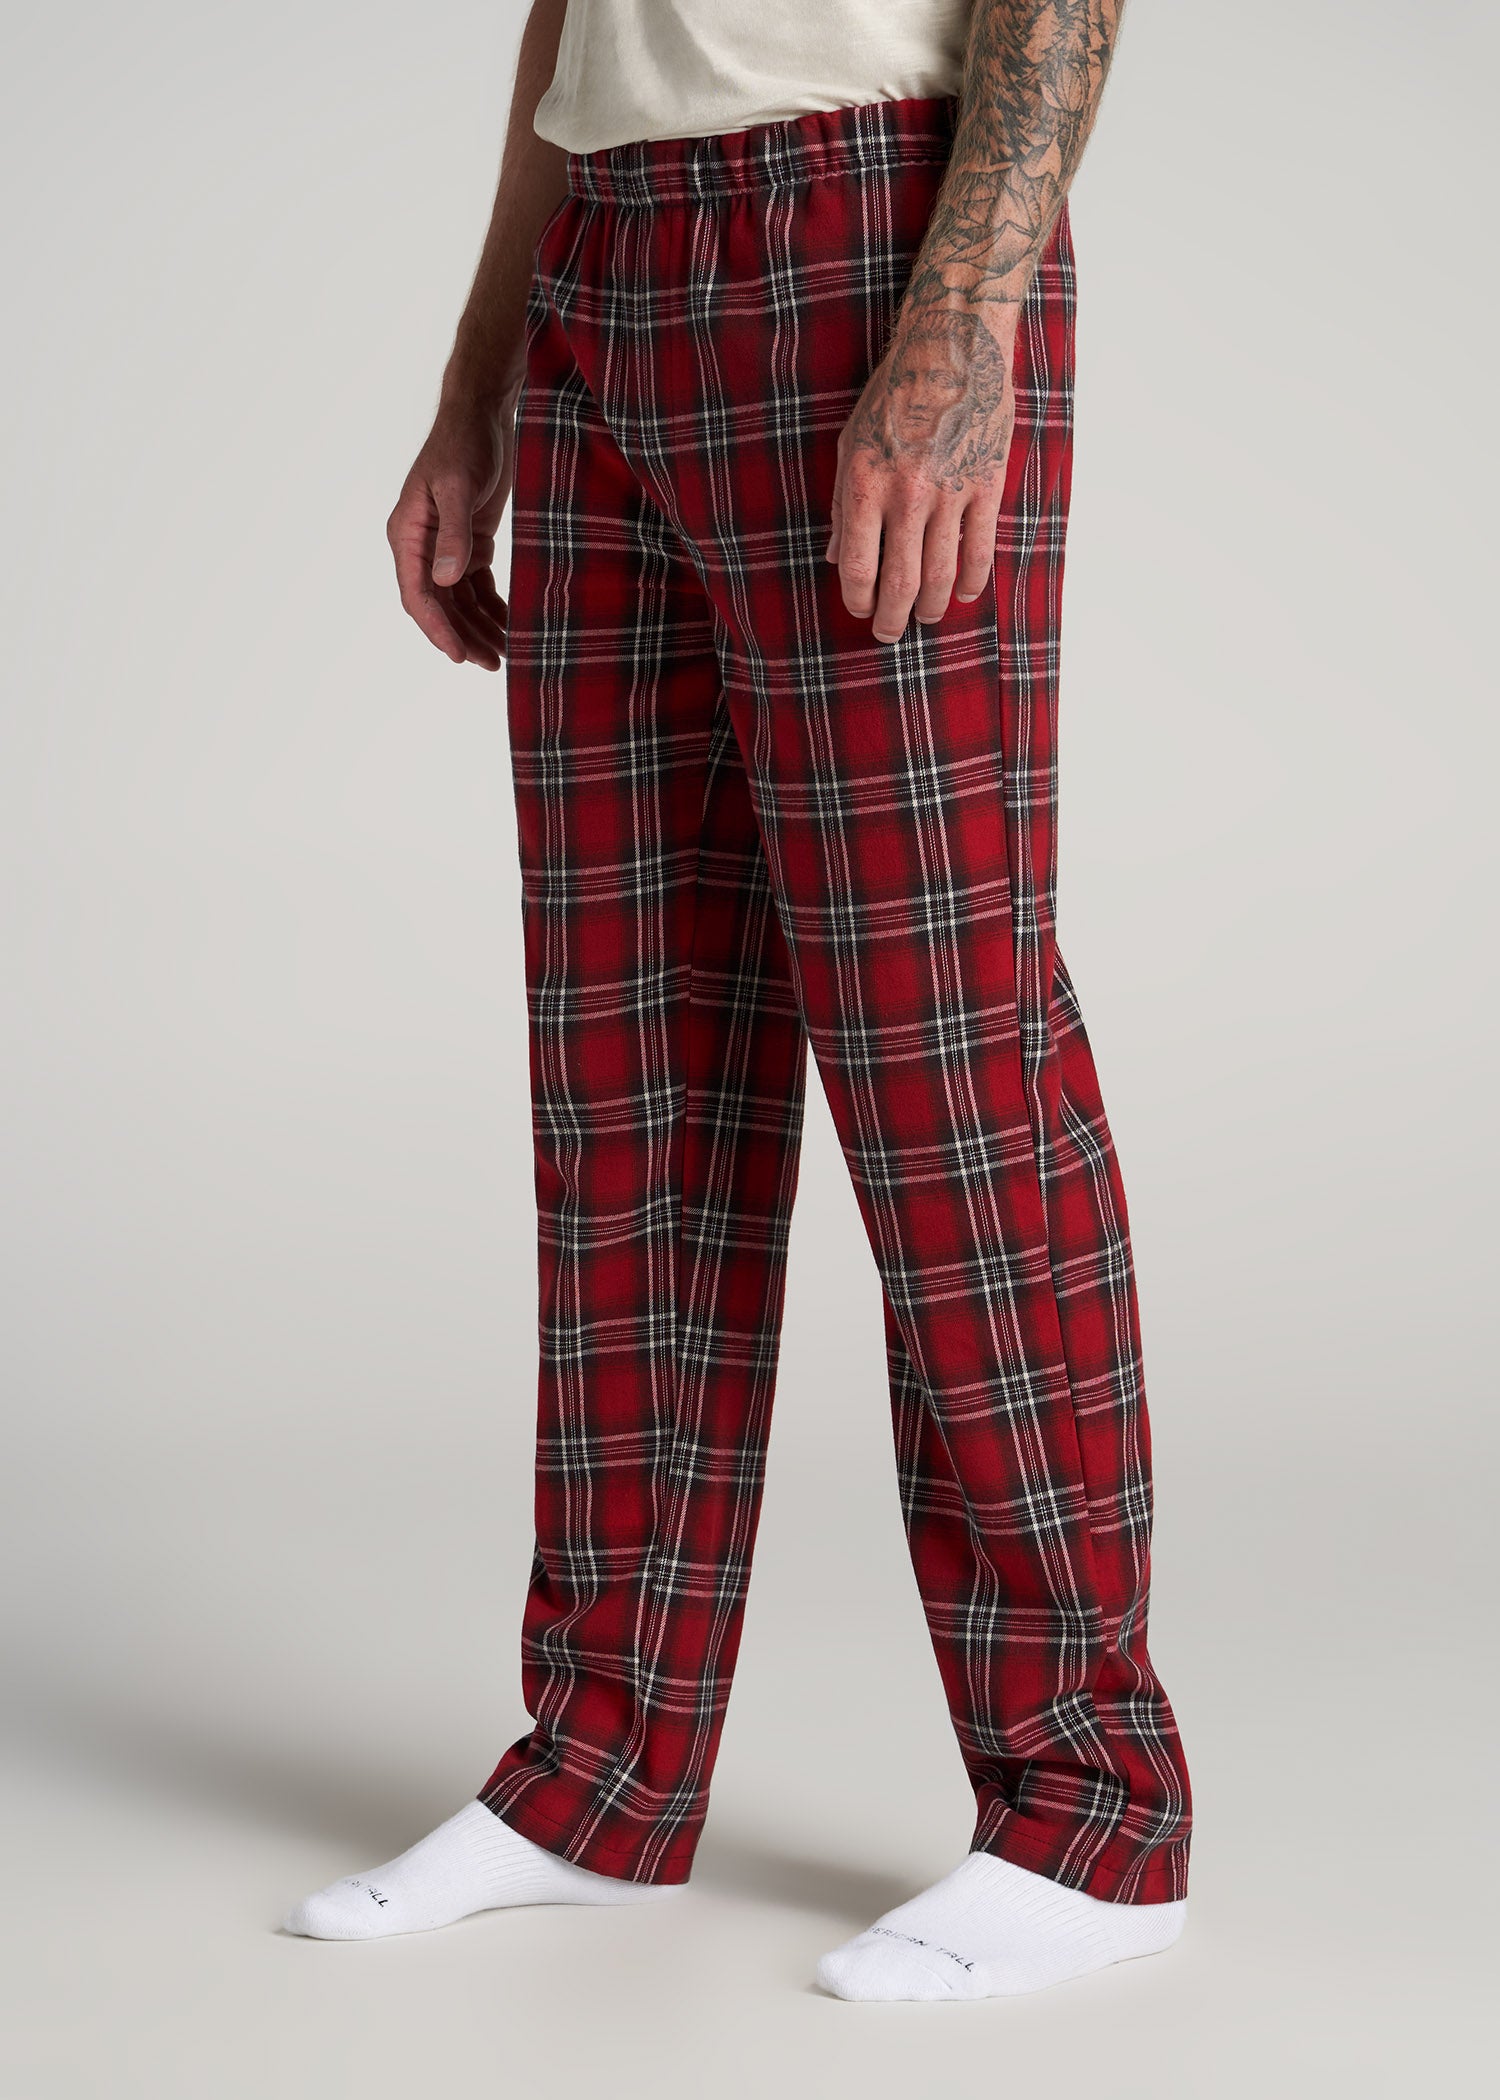 Flannel Pajama Pants Women with Pockets & Drawstring Comfy Plaid Lounge  Pants Casual Stretch Cotton Sleepwear Bottoms Soft Pj at Amazon Women's  Clothing store